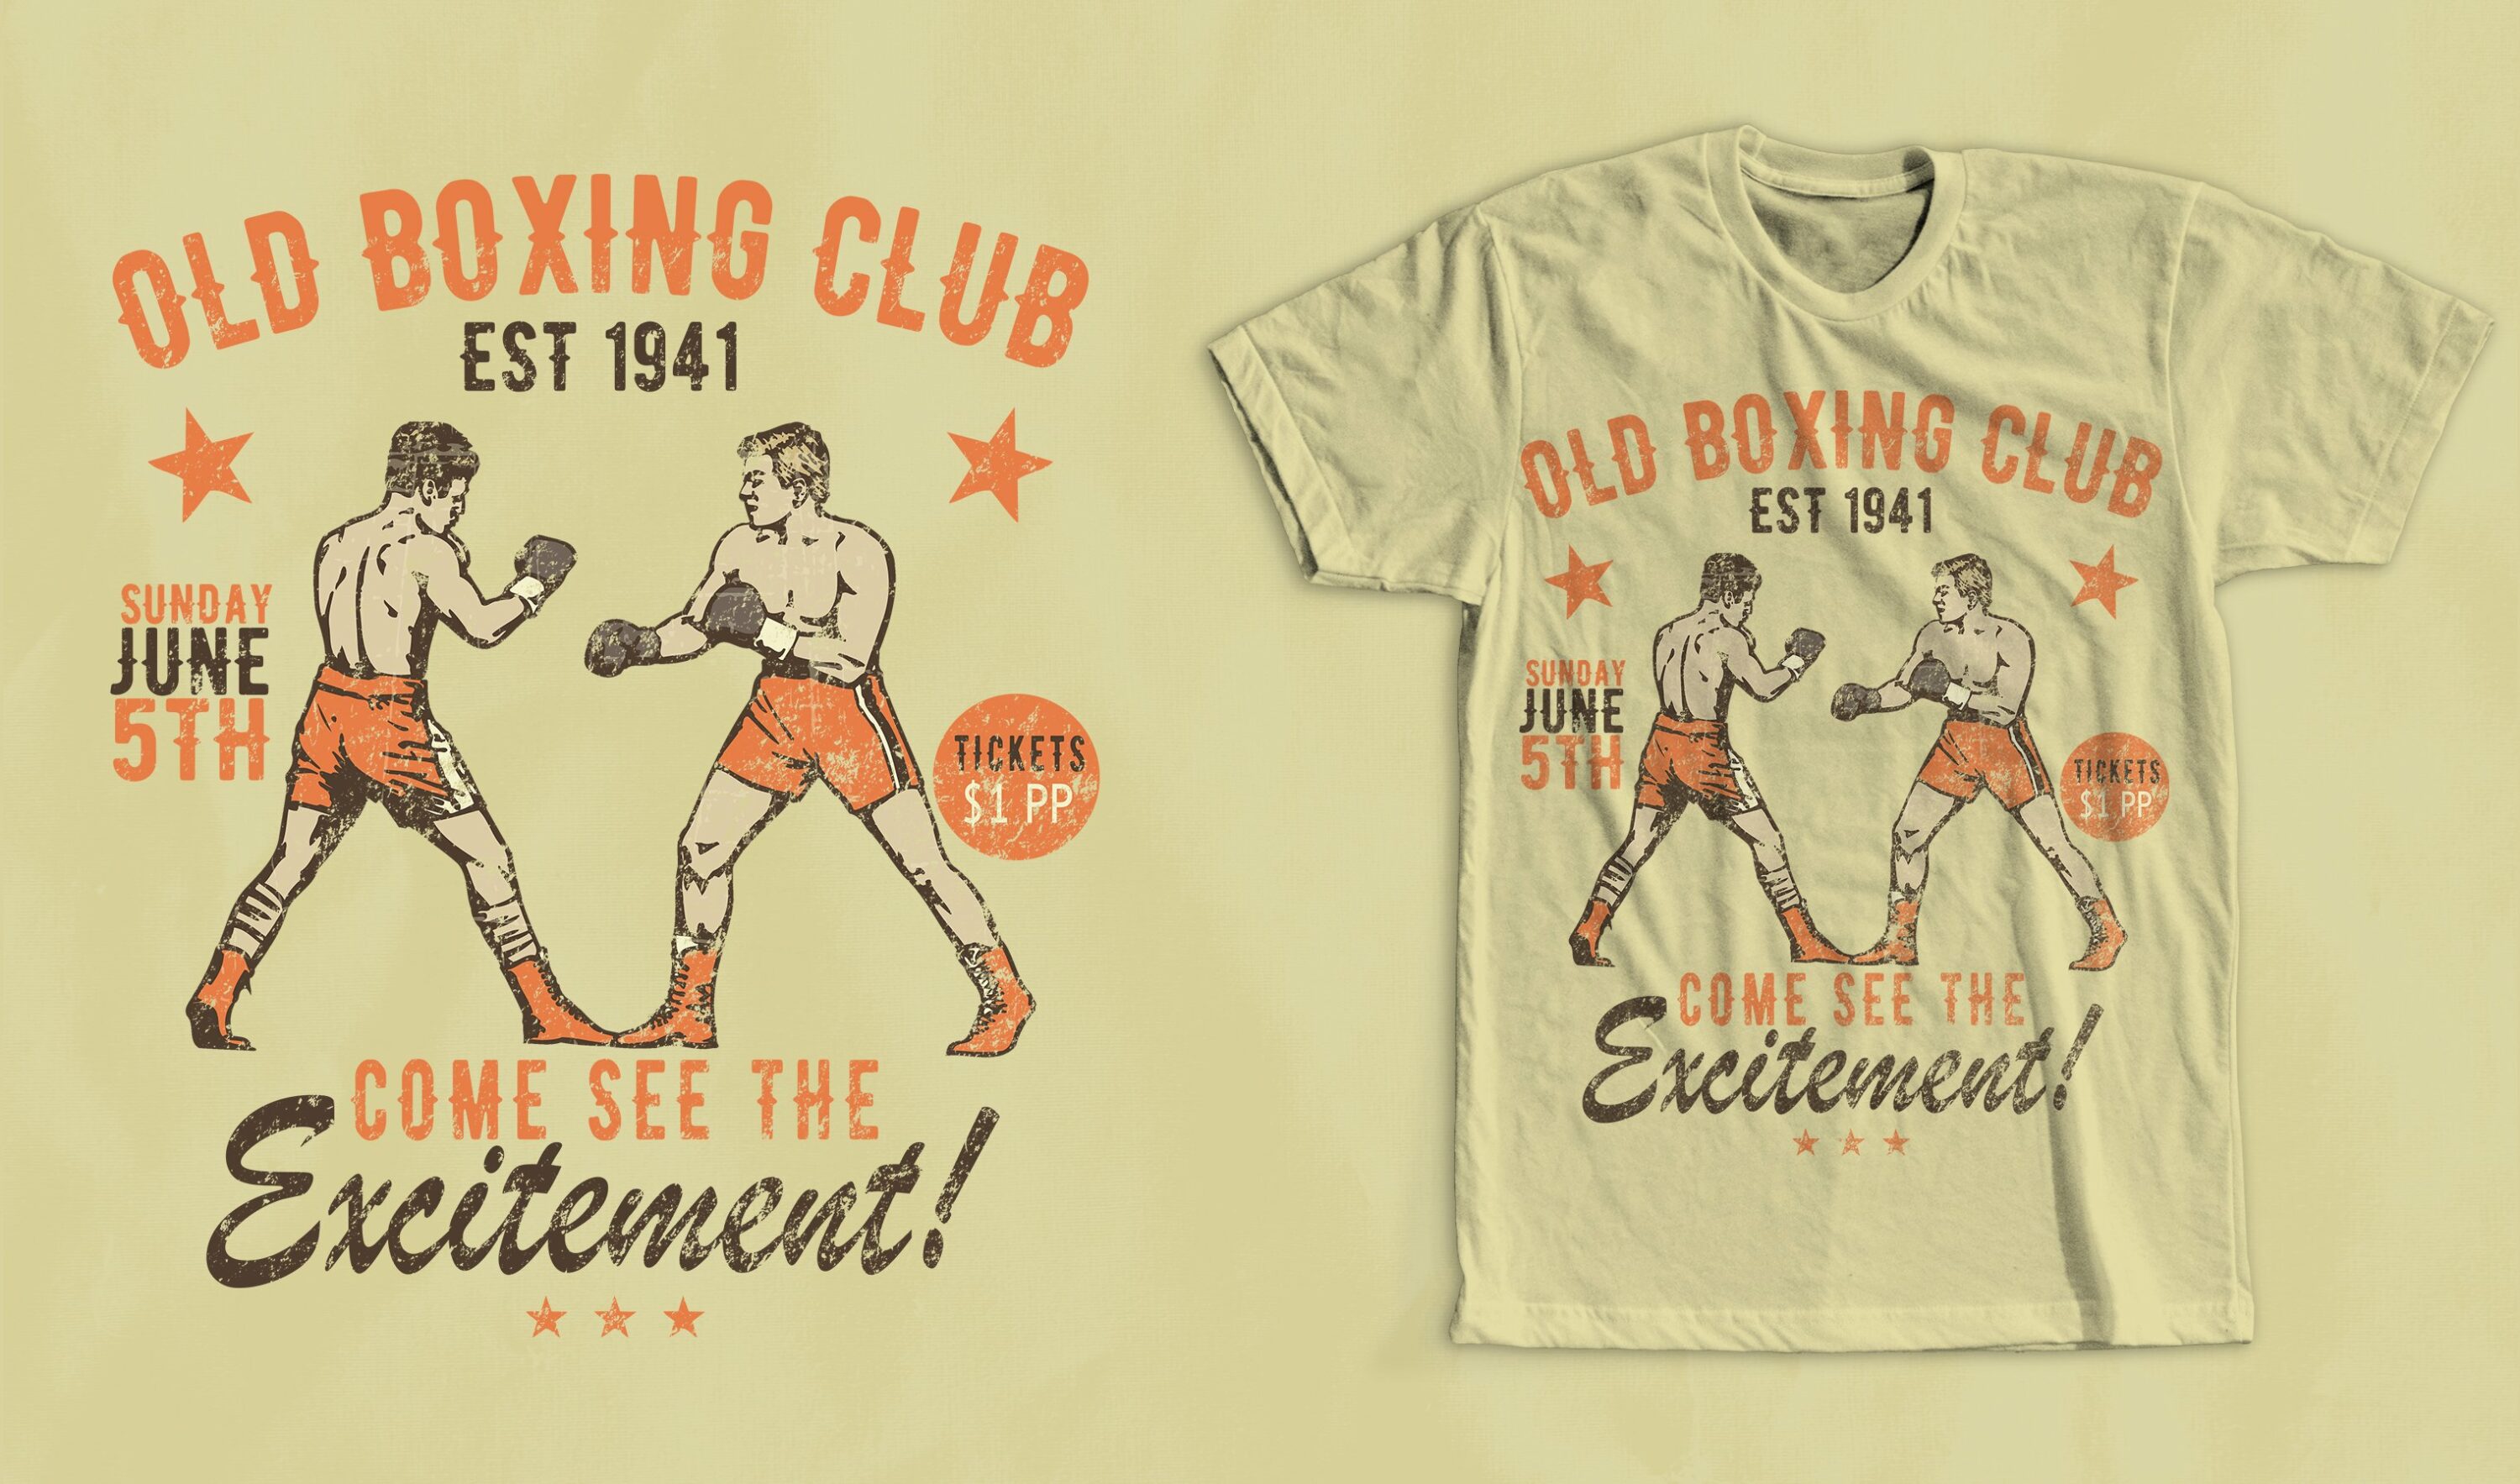 Classic t-shirt style with a boxing illustration.